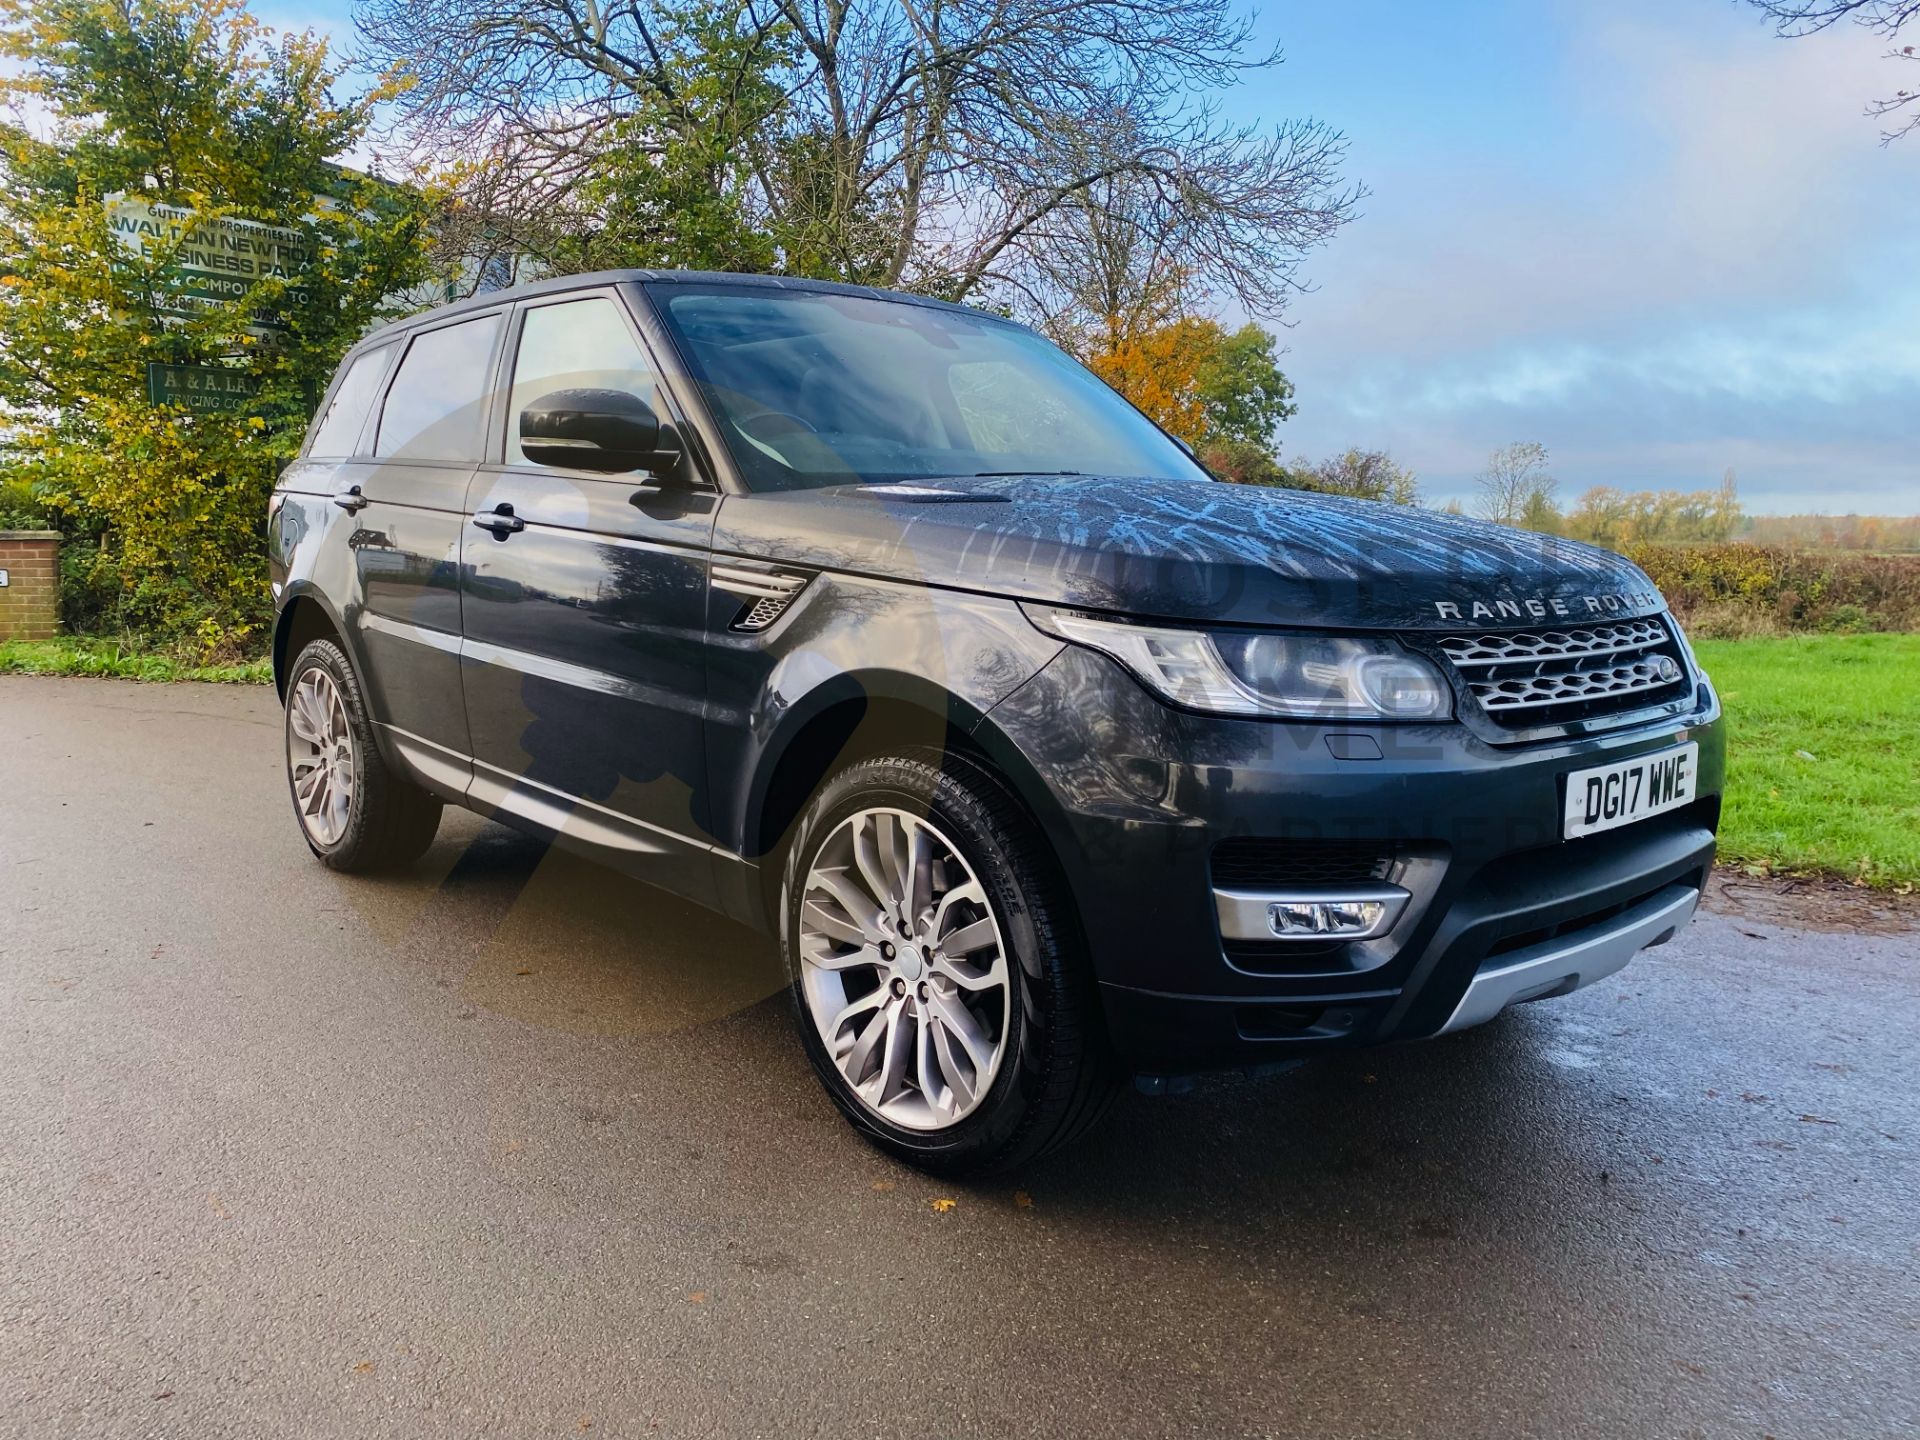 (ON SALE) RANGE ROVER SPORT "HSE" AUTO (NEW SHAPE) 17 REG - LEATHER - PANORAMIC ROOF - SAT NAV - - Image 2 of 47